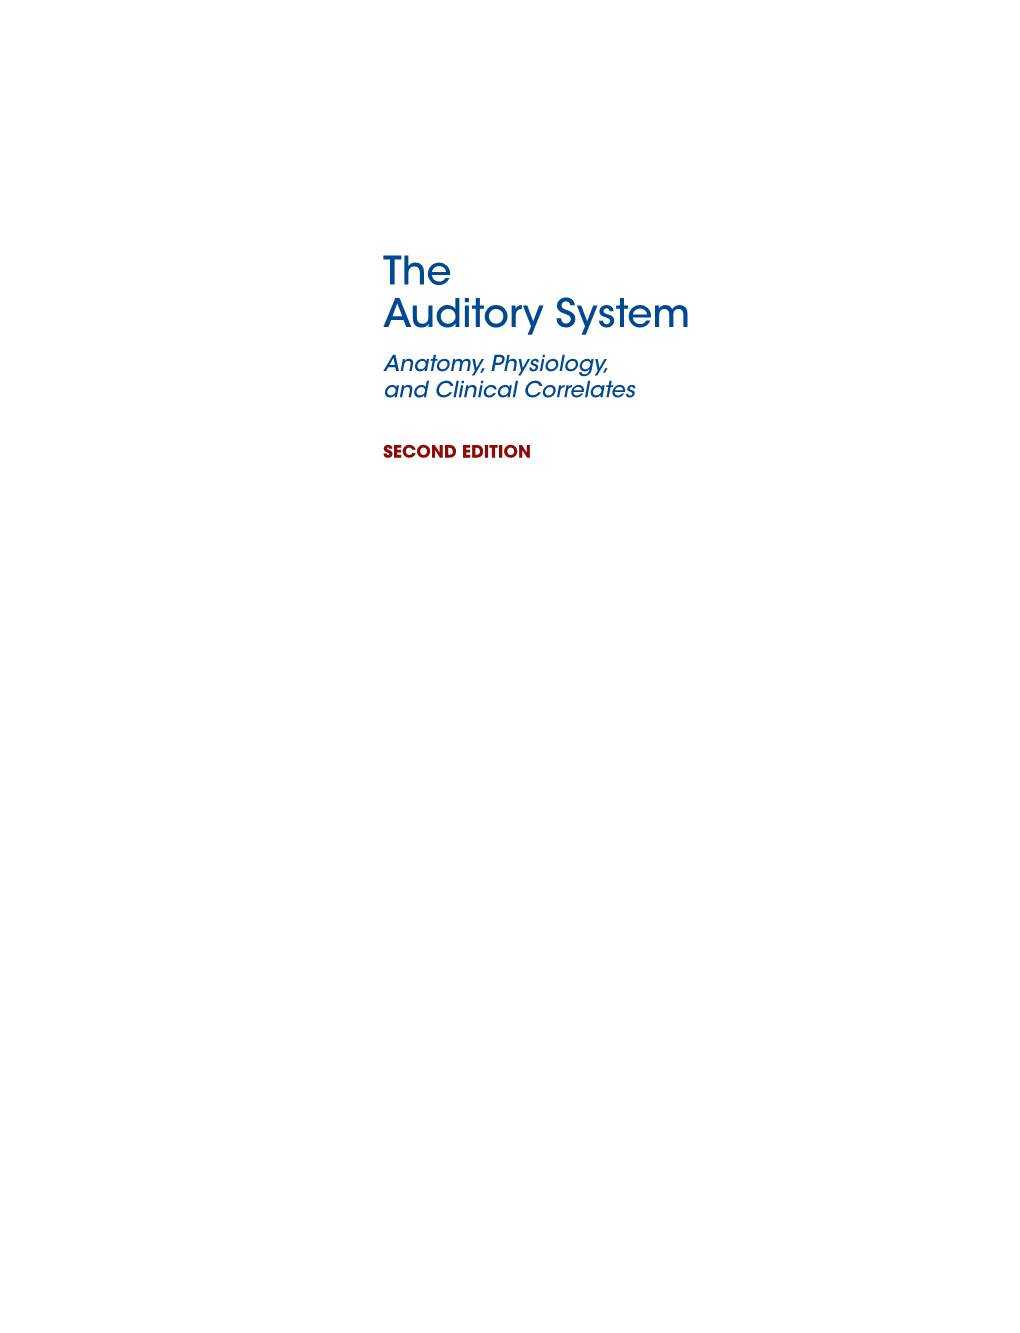 The Auditory System Anatomy, Physiology, and Clinical Correlates